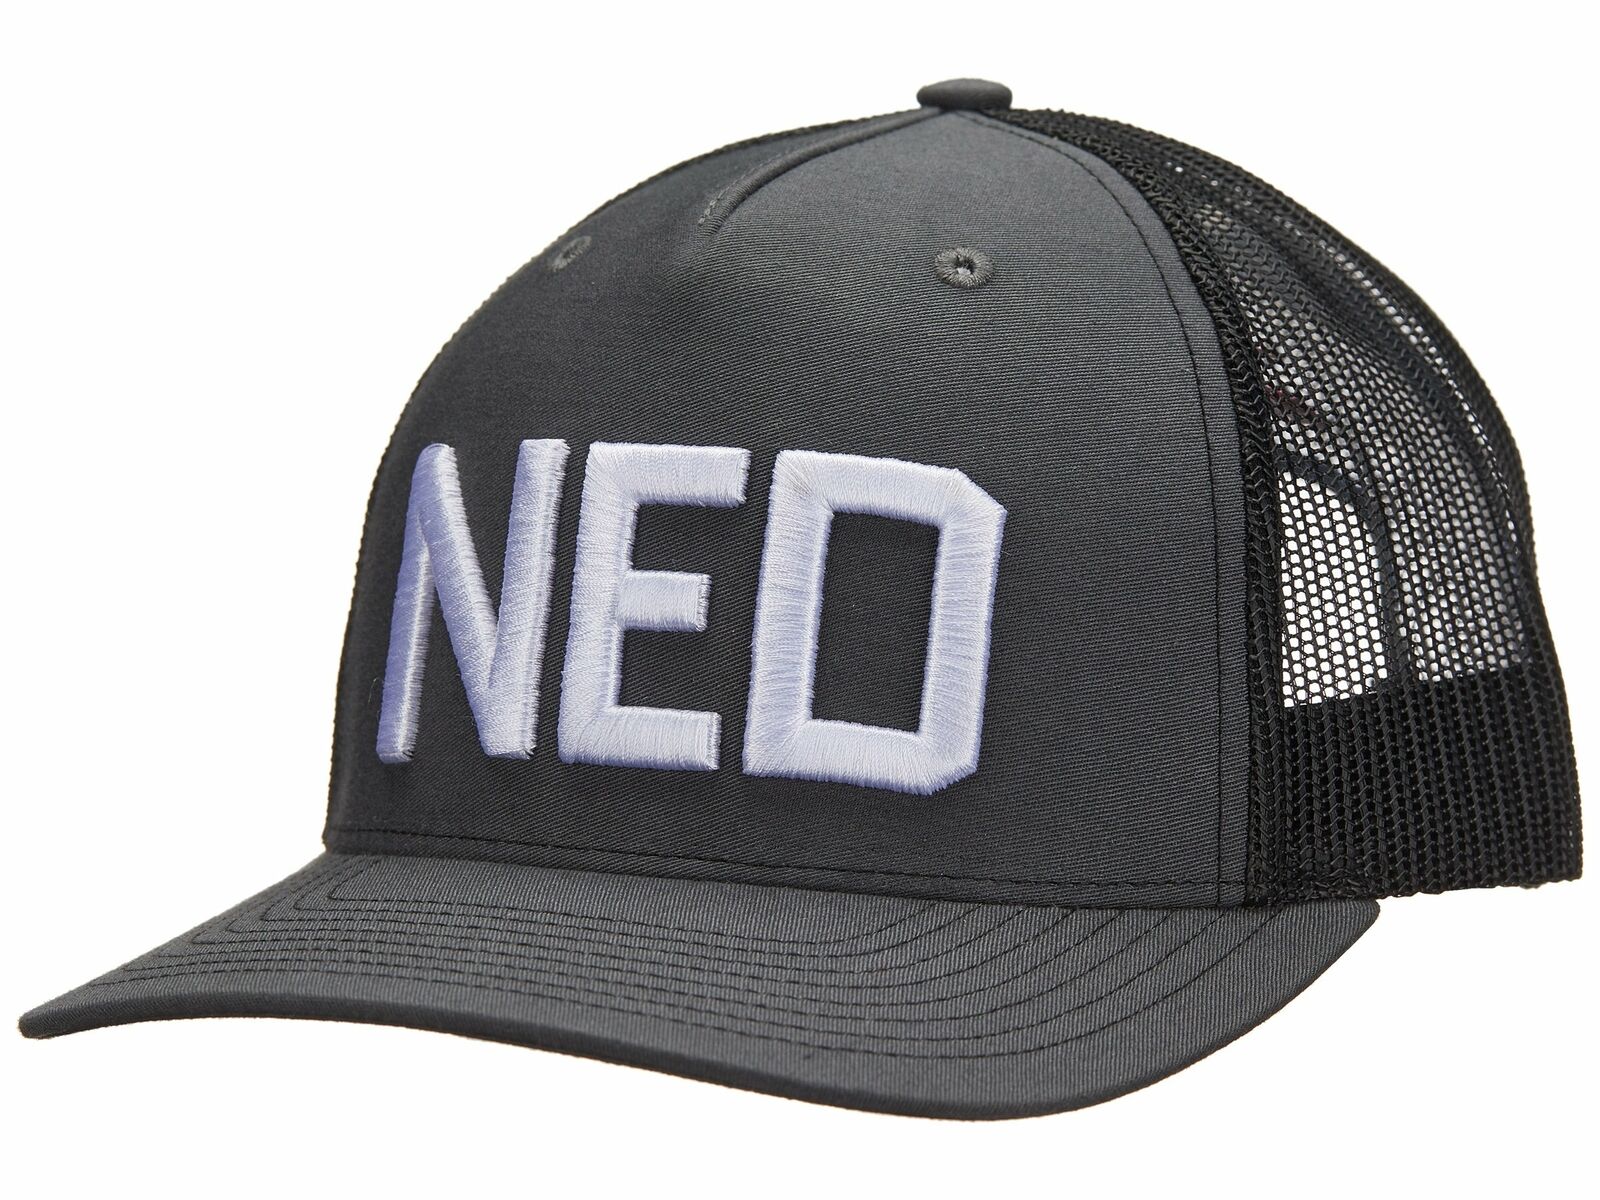 Z-Man NED Embroidered Trucker Hats – Three Rivers Tackle